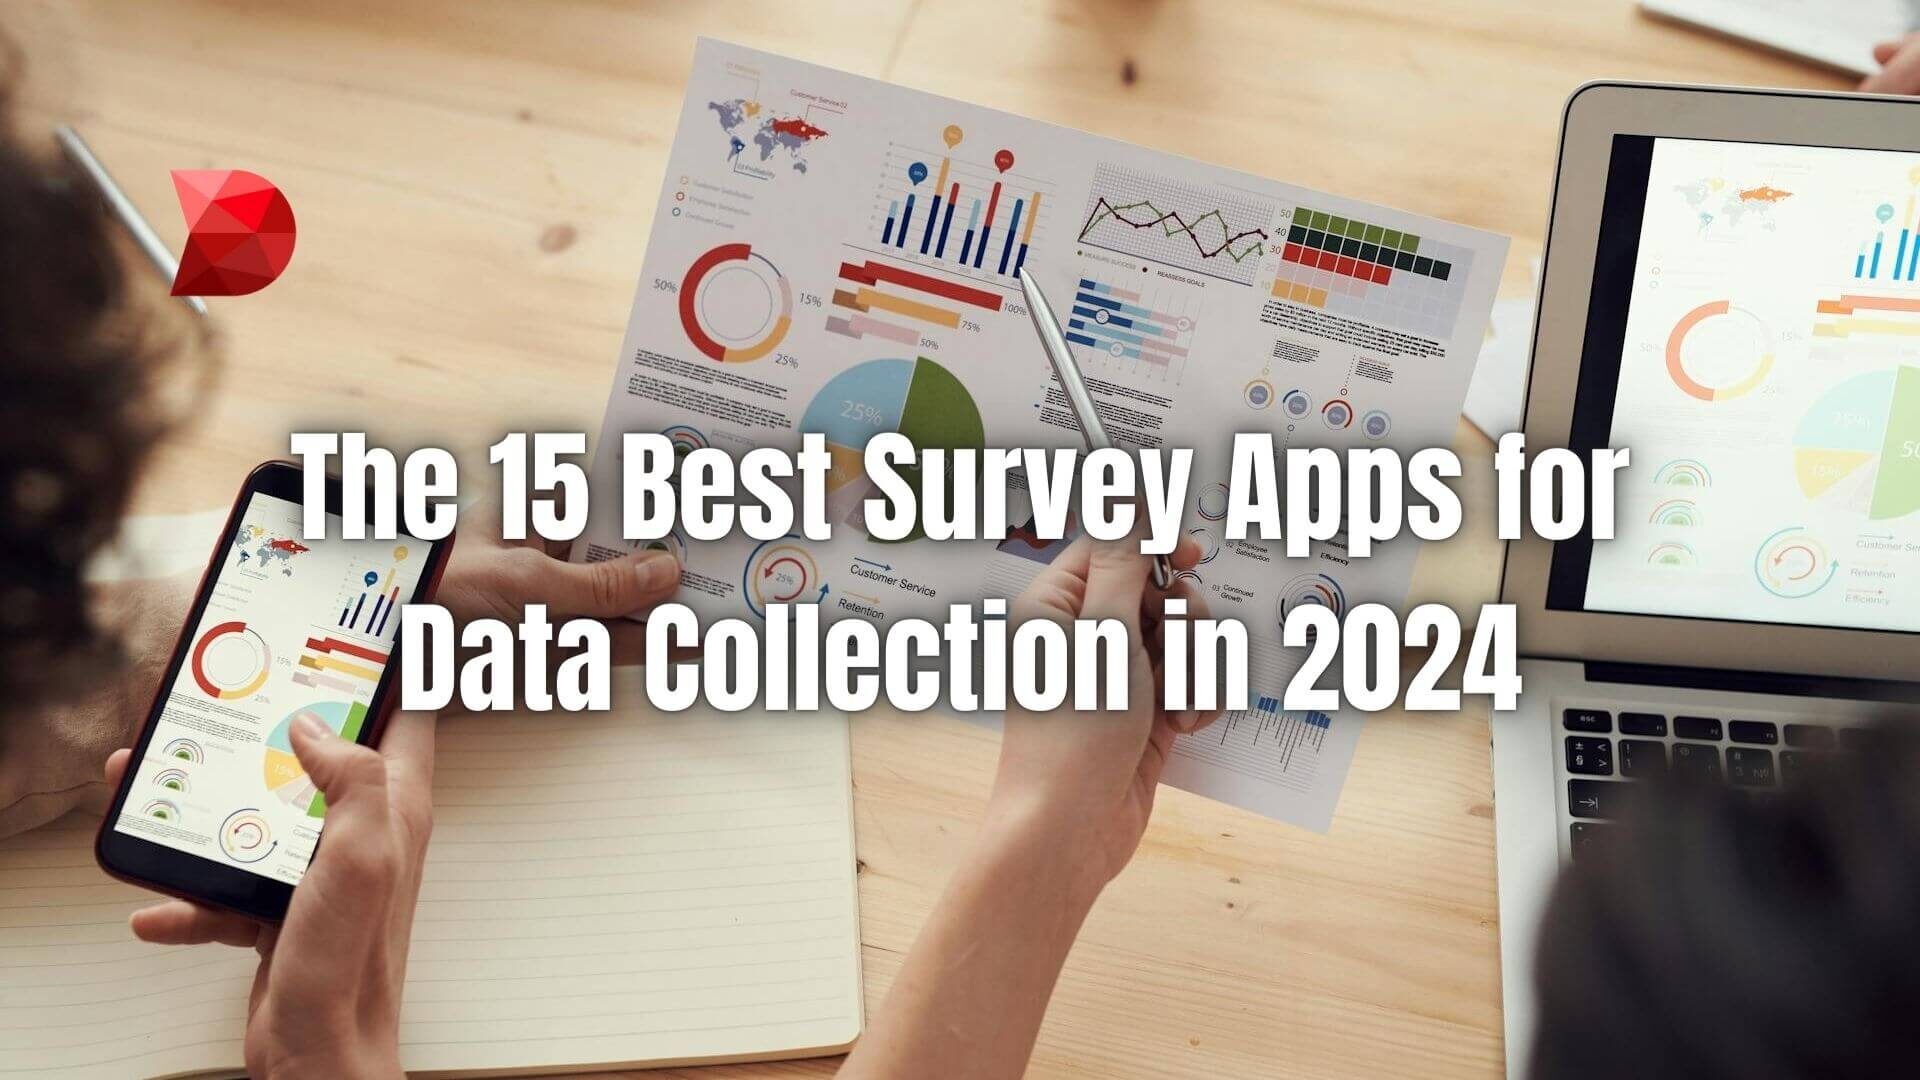 Streamline your data journey in 2024! Explore this guide to the 15 best survey apps, designed for seamless and impactful data collection.